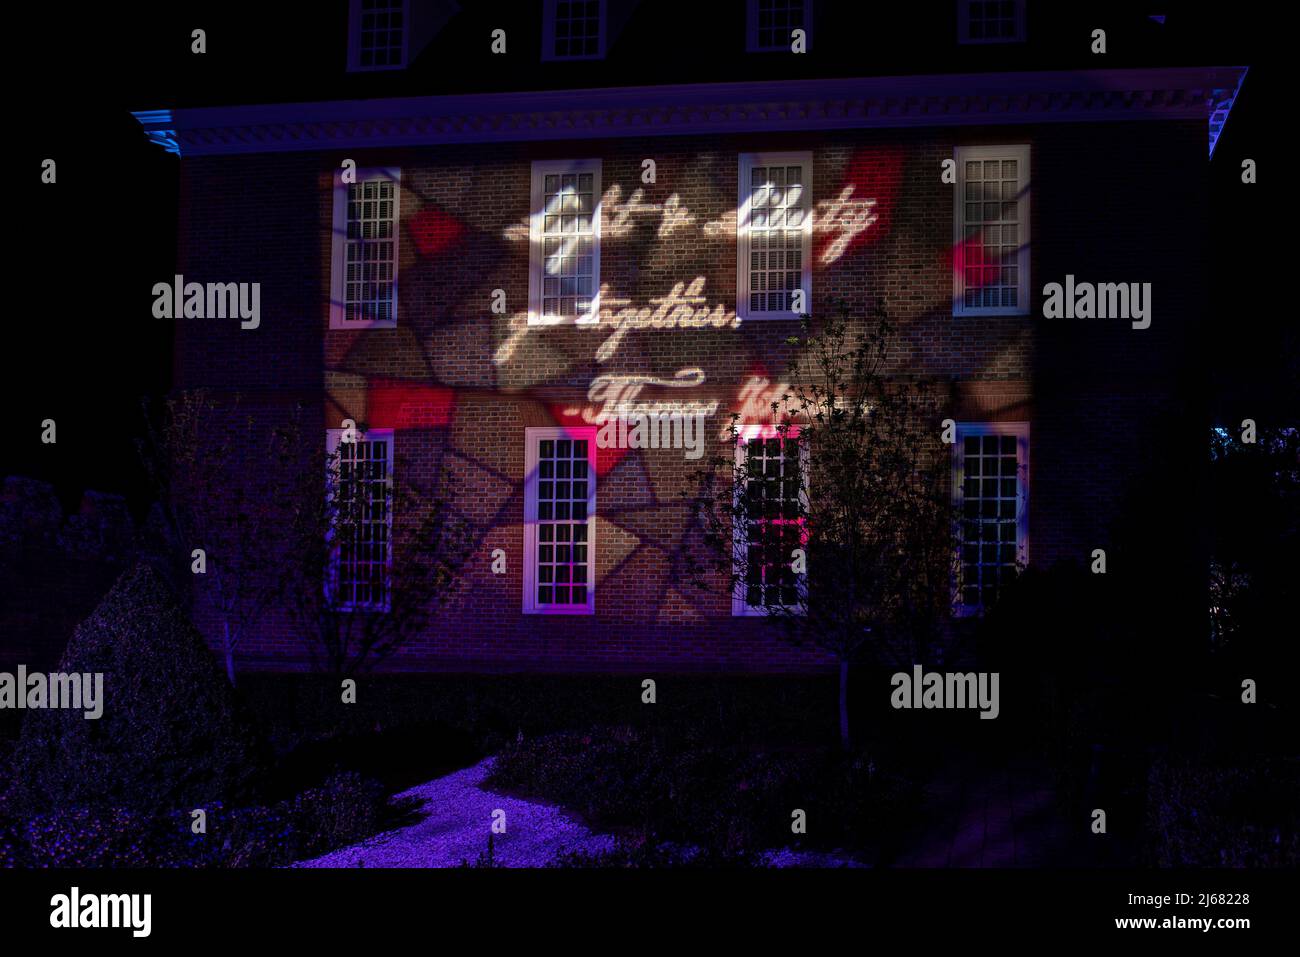 Light and Liberty go Together. Thomas Jeffeston quote written in light at the garden entrance to the Colonial Williamsburg Palace. CW Light Show 2022. Stock Photo